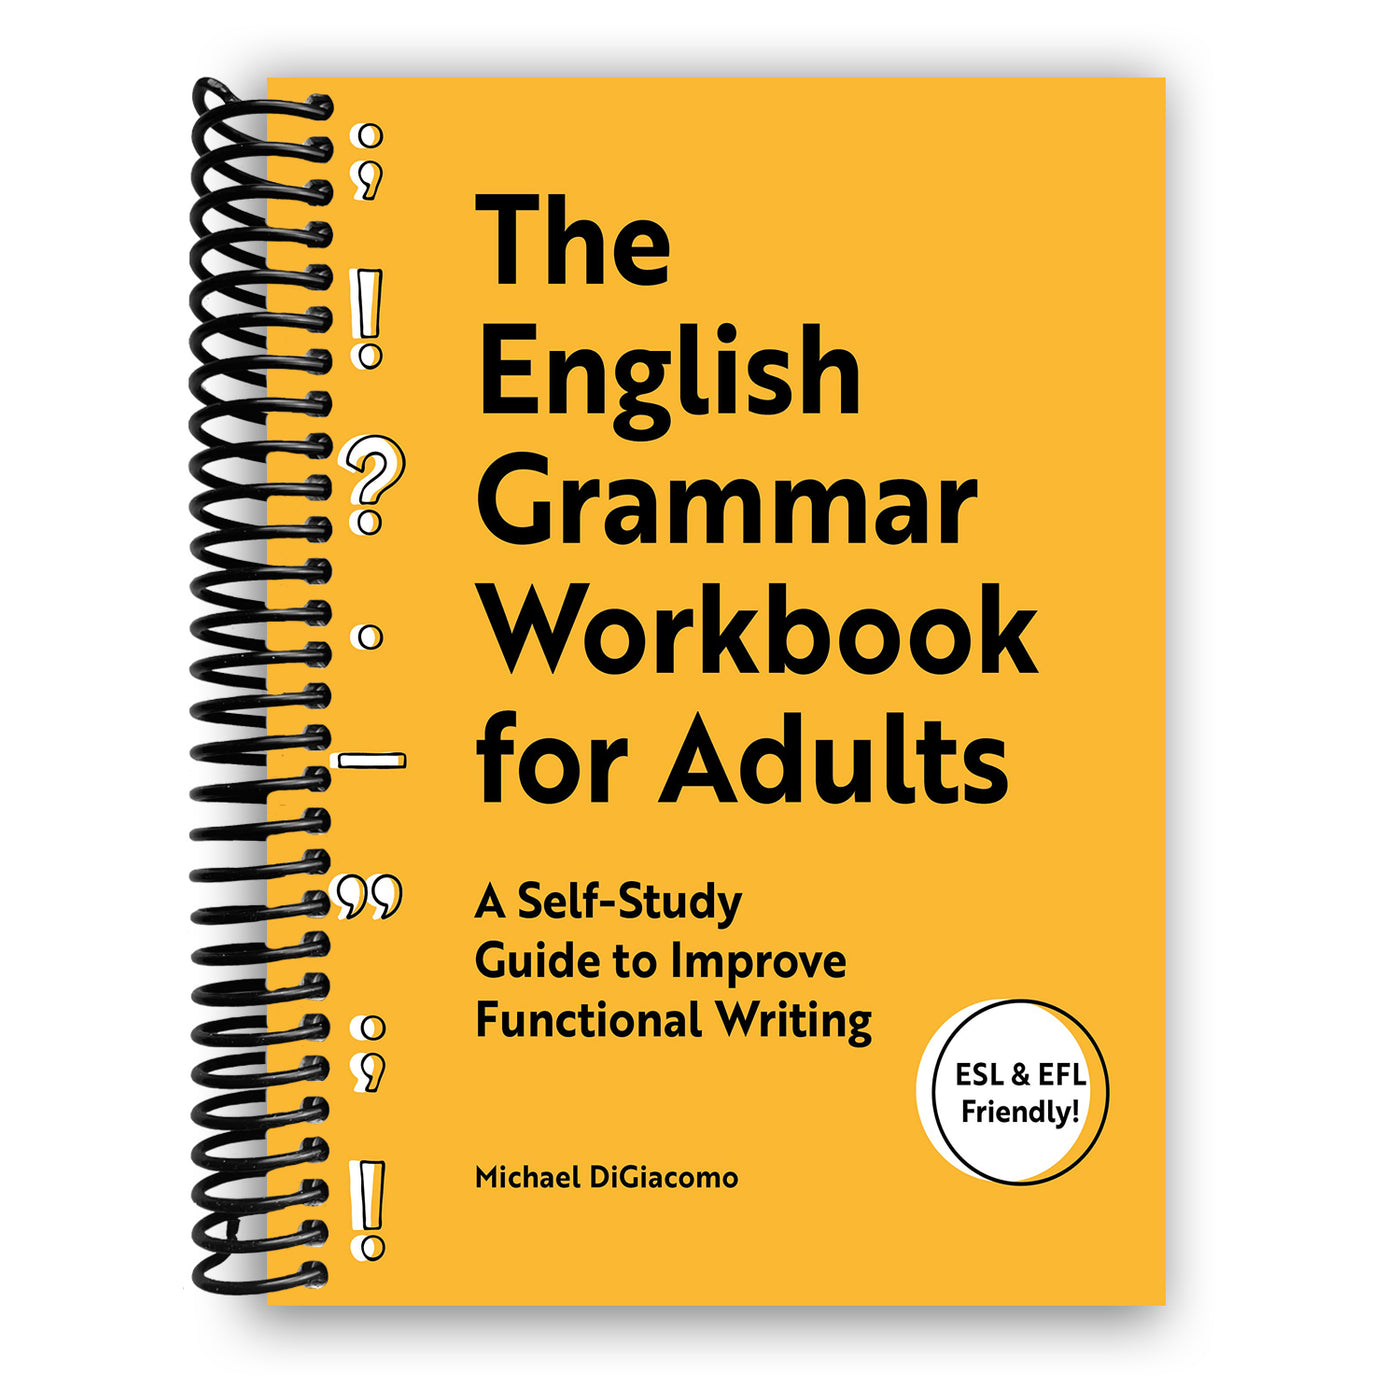 The English Grammar Workbook for Adults: A Self-Study Guide to Improve Functional Writing (Spiral Bound)